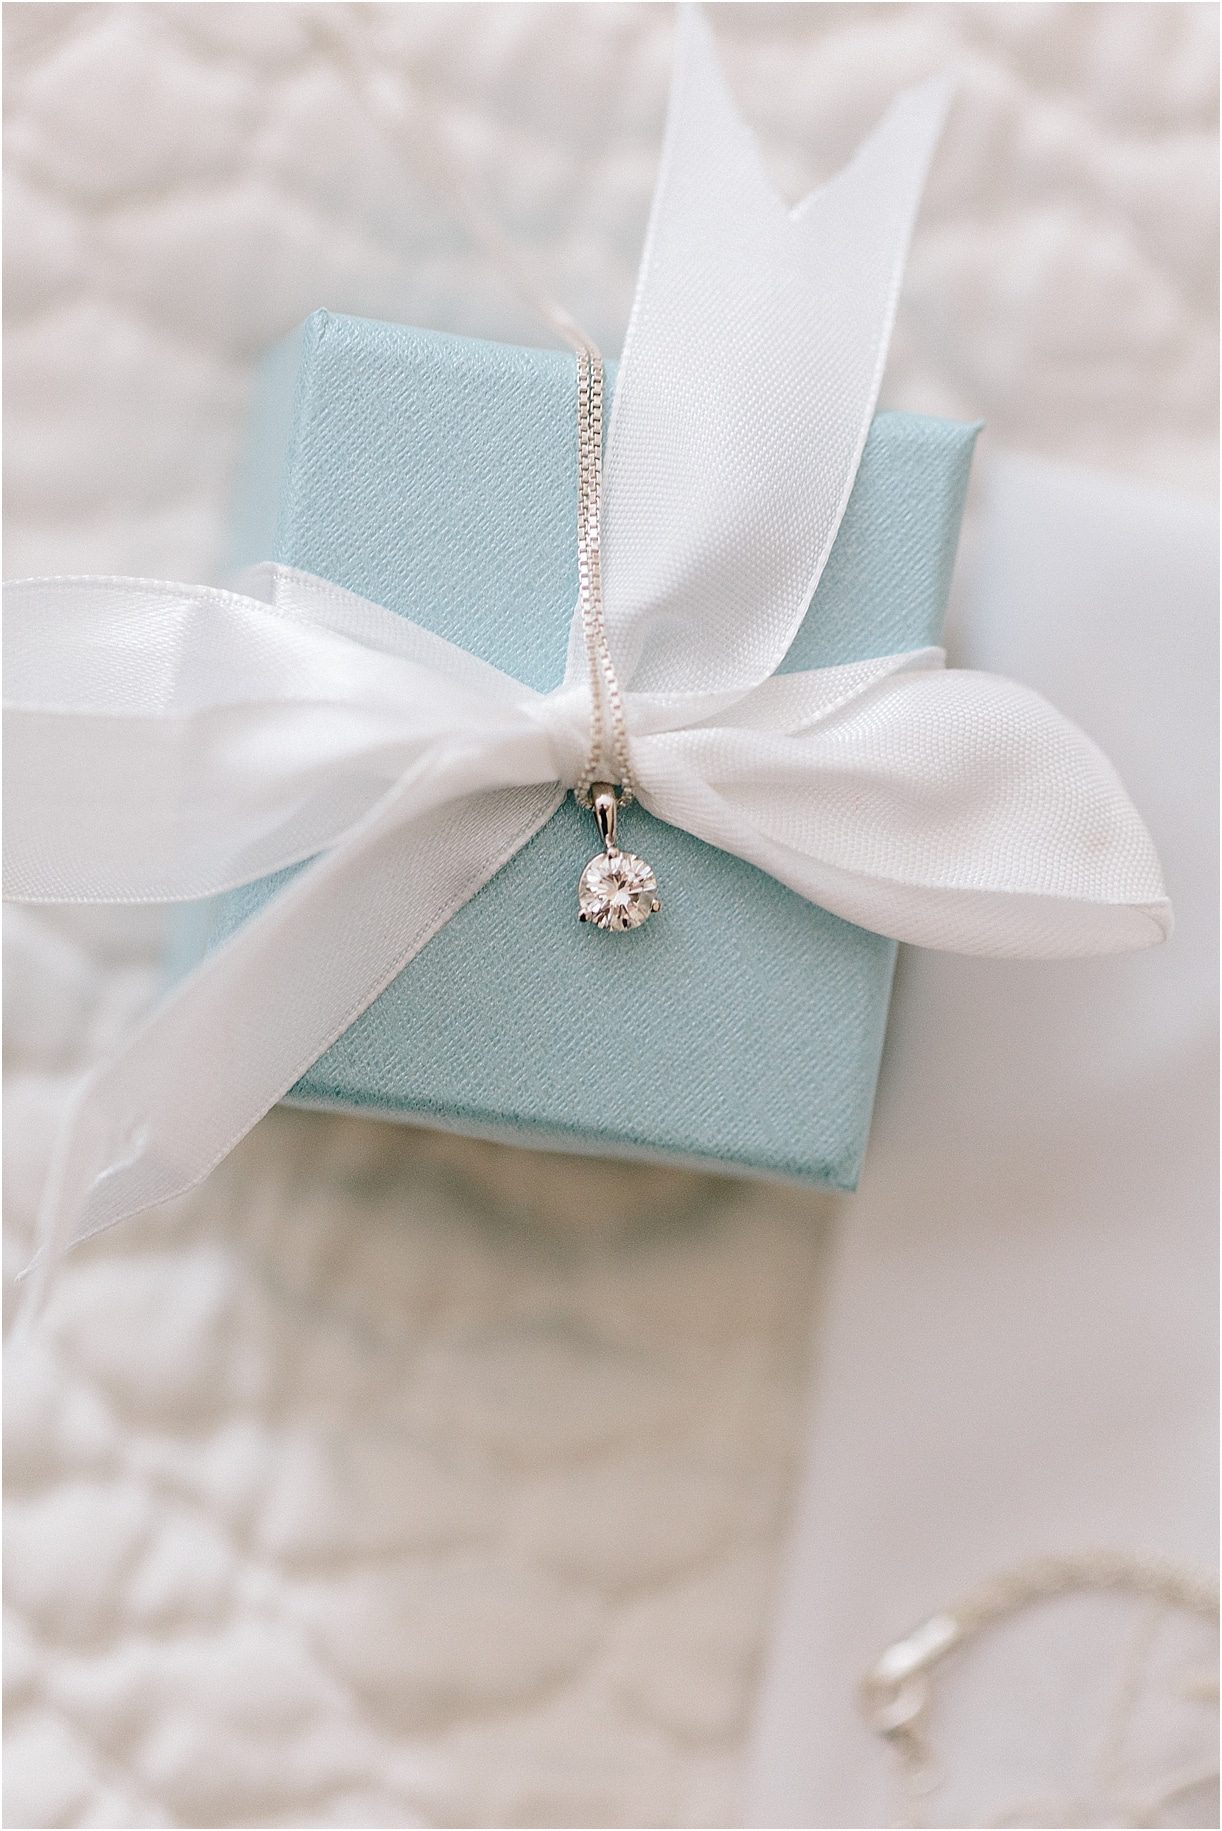 A Pink and Aqua Roanoke Virginia Wedding as seen on Hill City Bride Blog and Magazine - diamond necklace